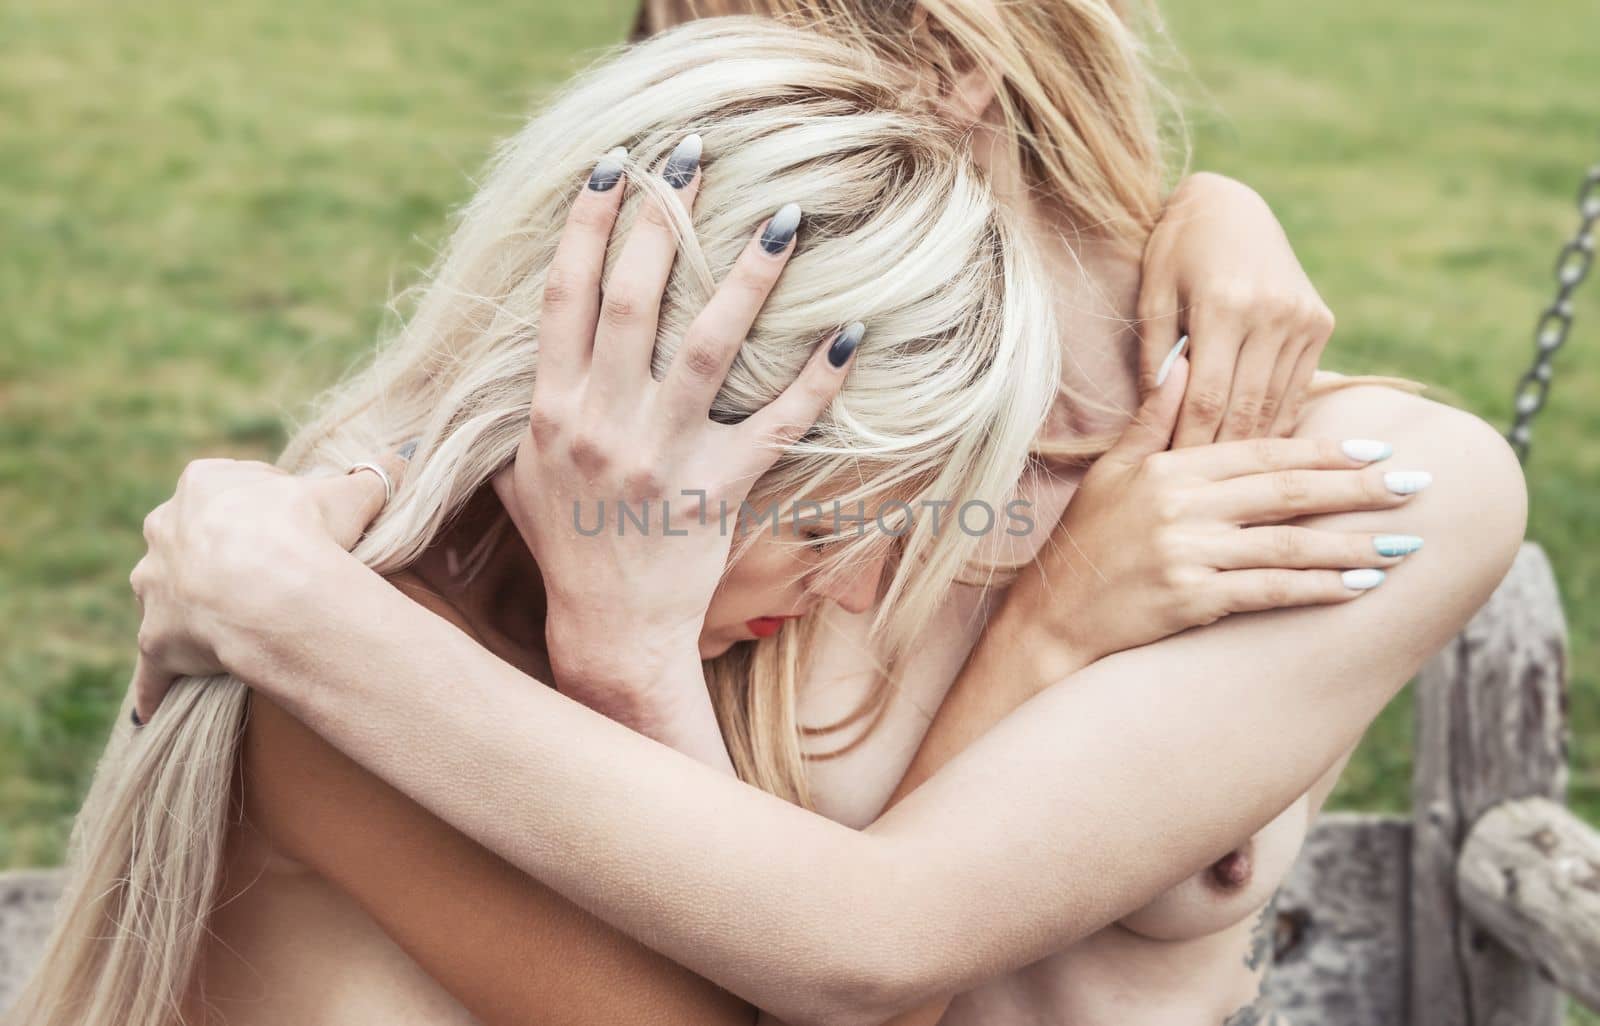 Intimate embrace between two young nude women by palinchak